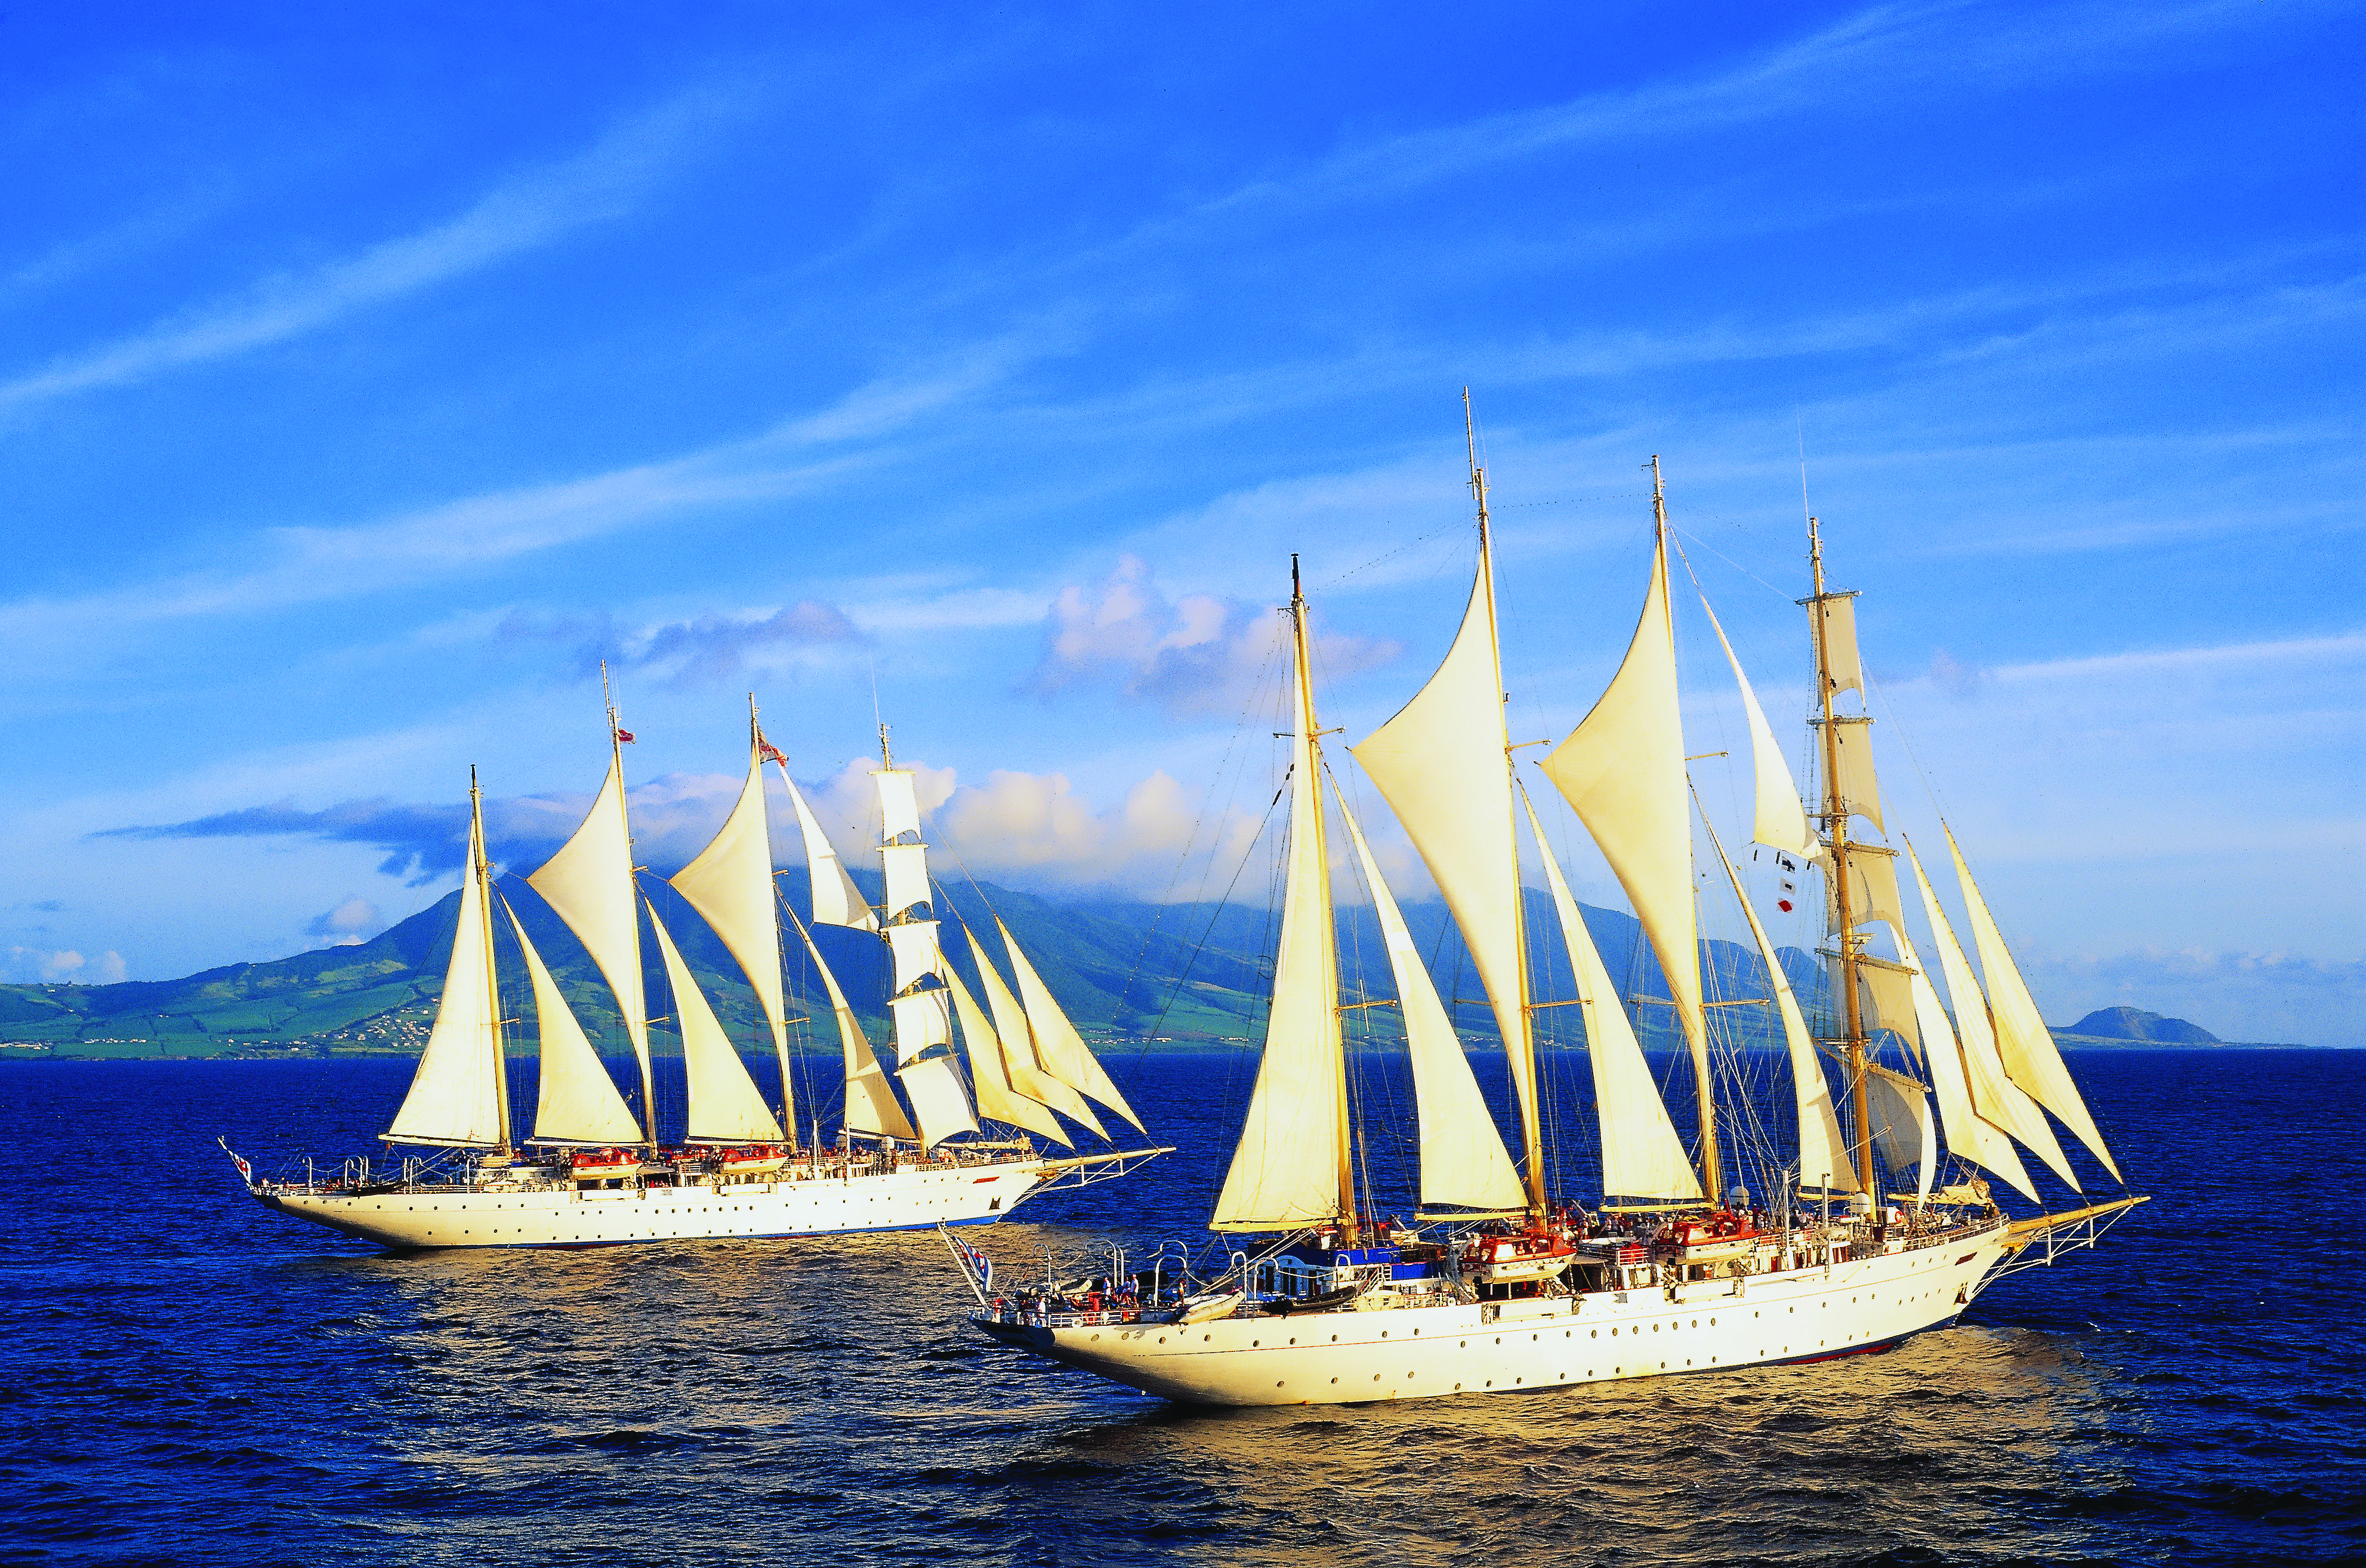 The Romance of Sailing Ships: Cruising Aboard the Star Flyer - Luxe ...